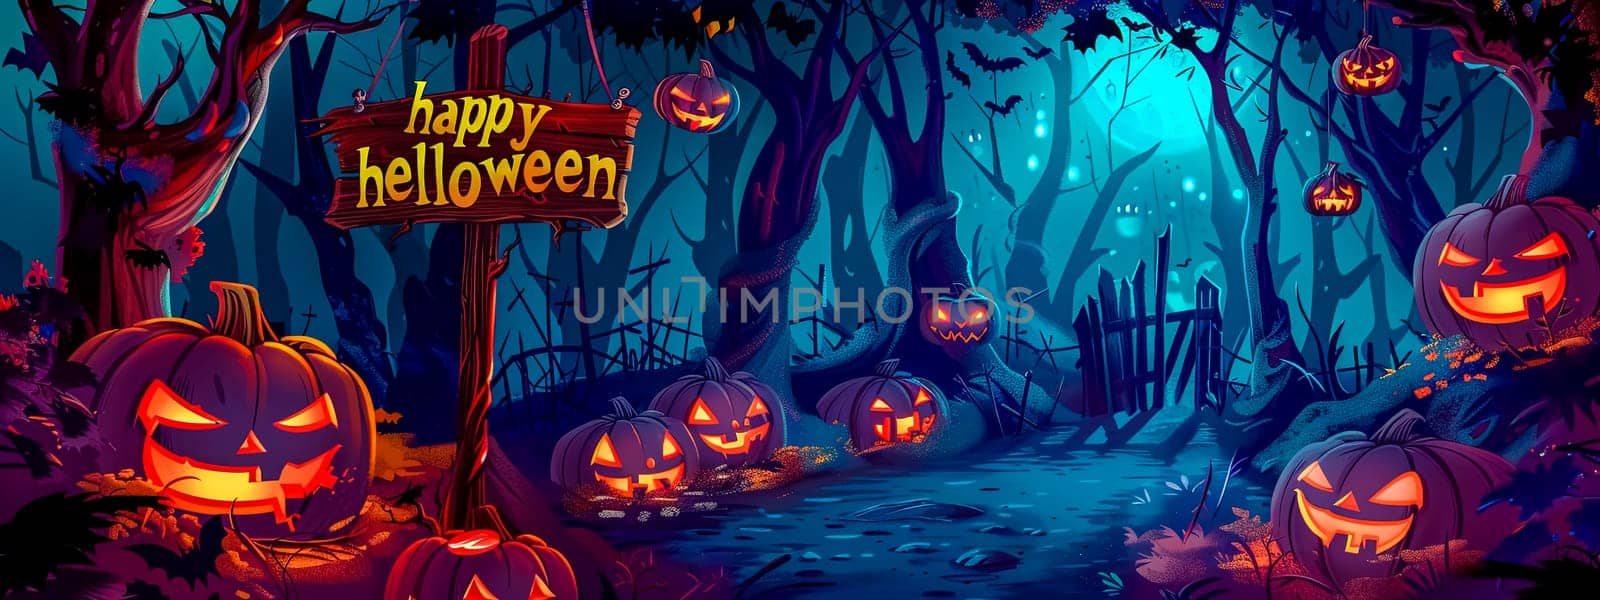 Spooky halloween night background with glowing pumpkins and eerie woods